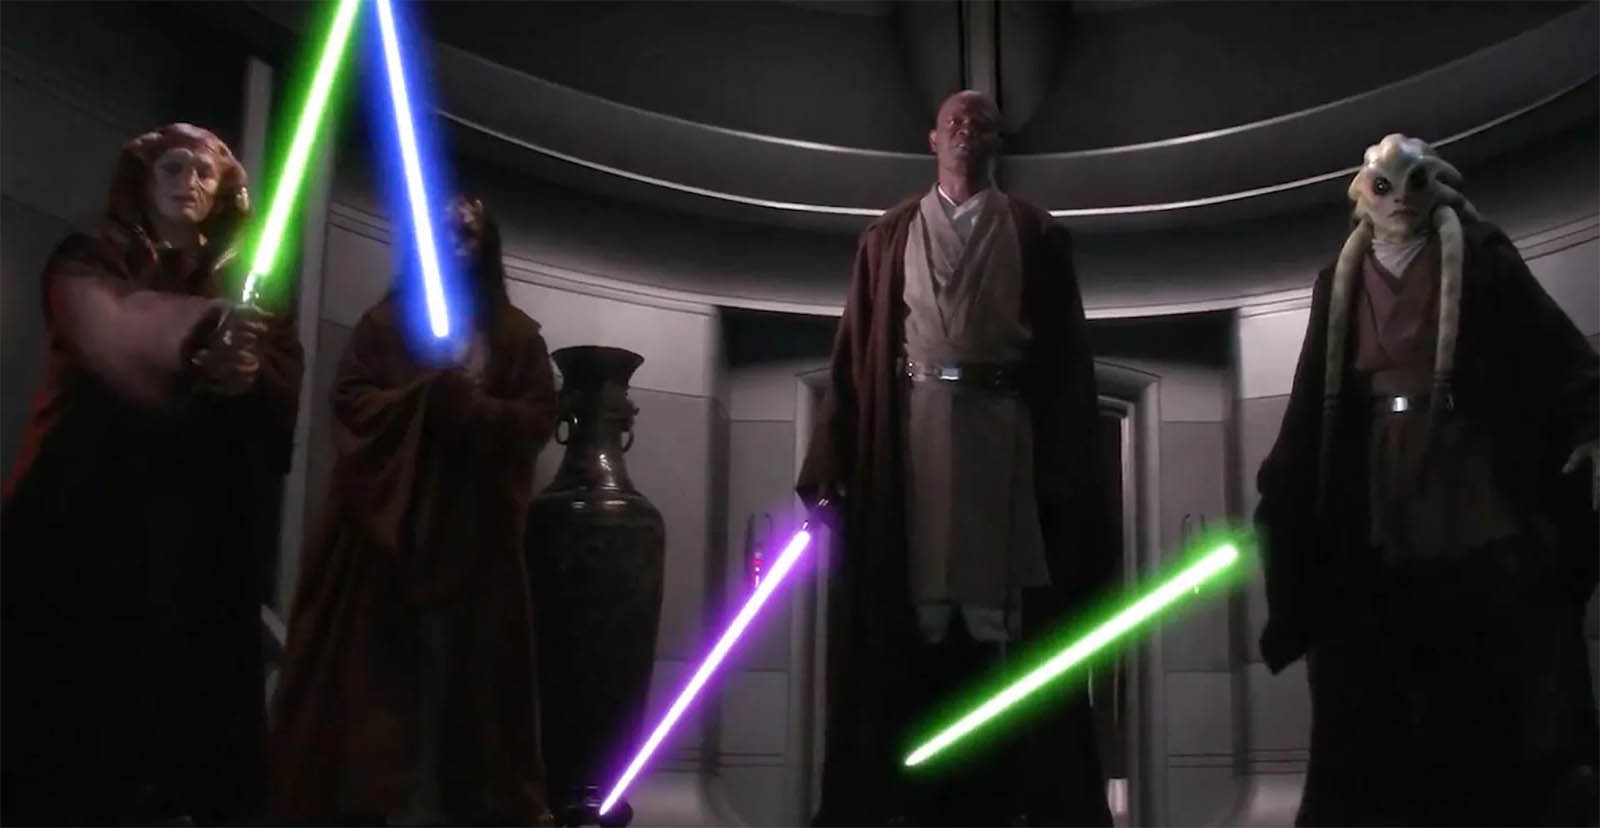 Are You More Jedi or Sith? Take This Quiz to Find Out Star Wars Lightsaber Colors